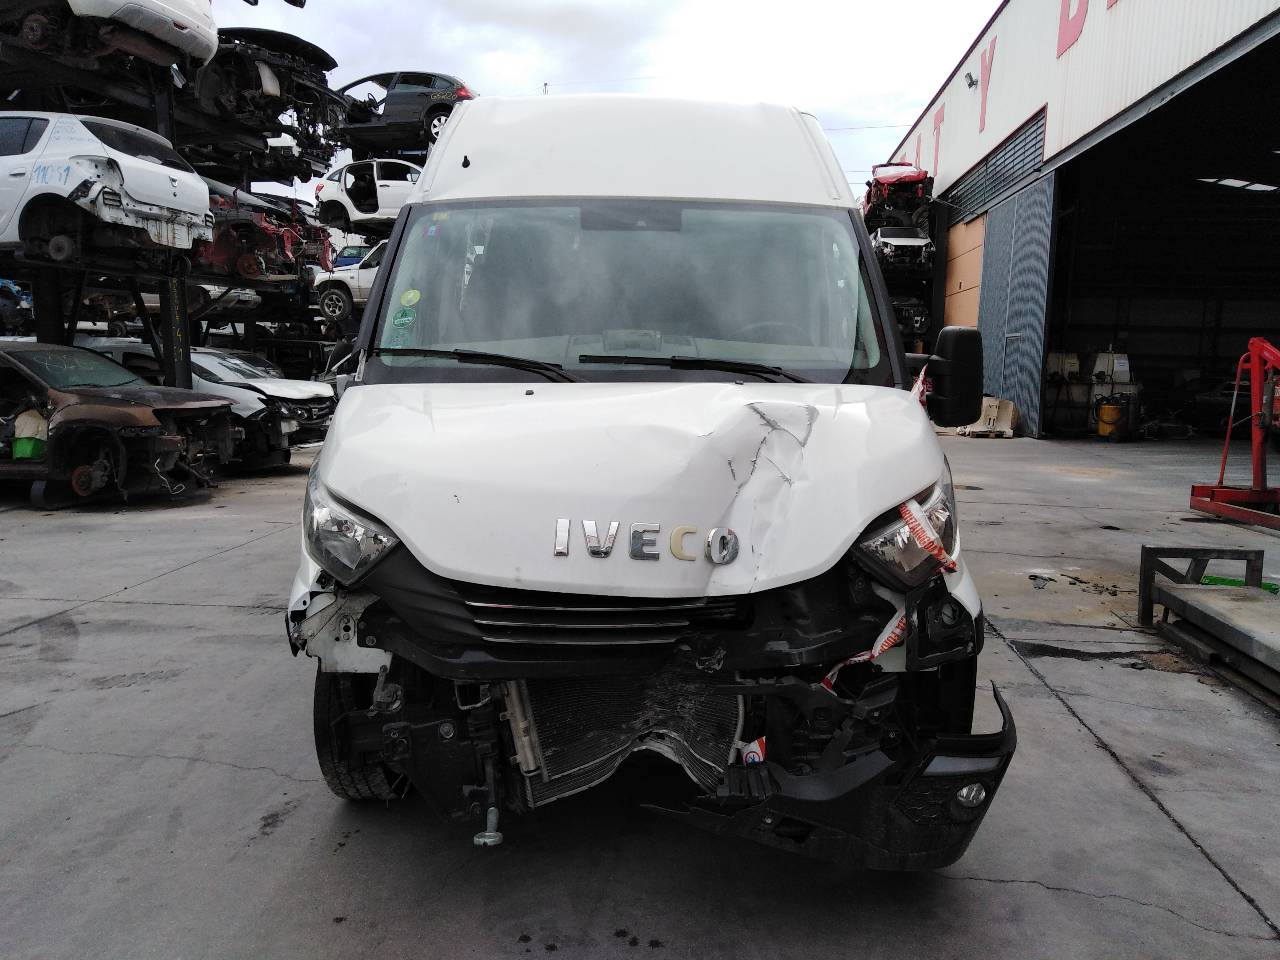 IVECO Daily ABS blokas 5802268475, P3-A8-14-2 24075793